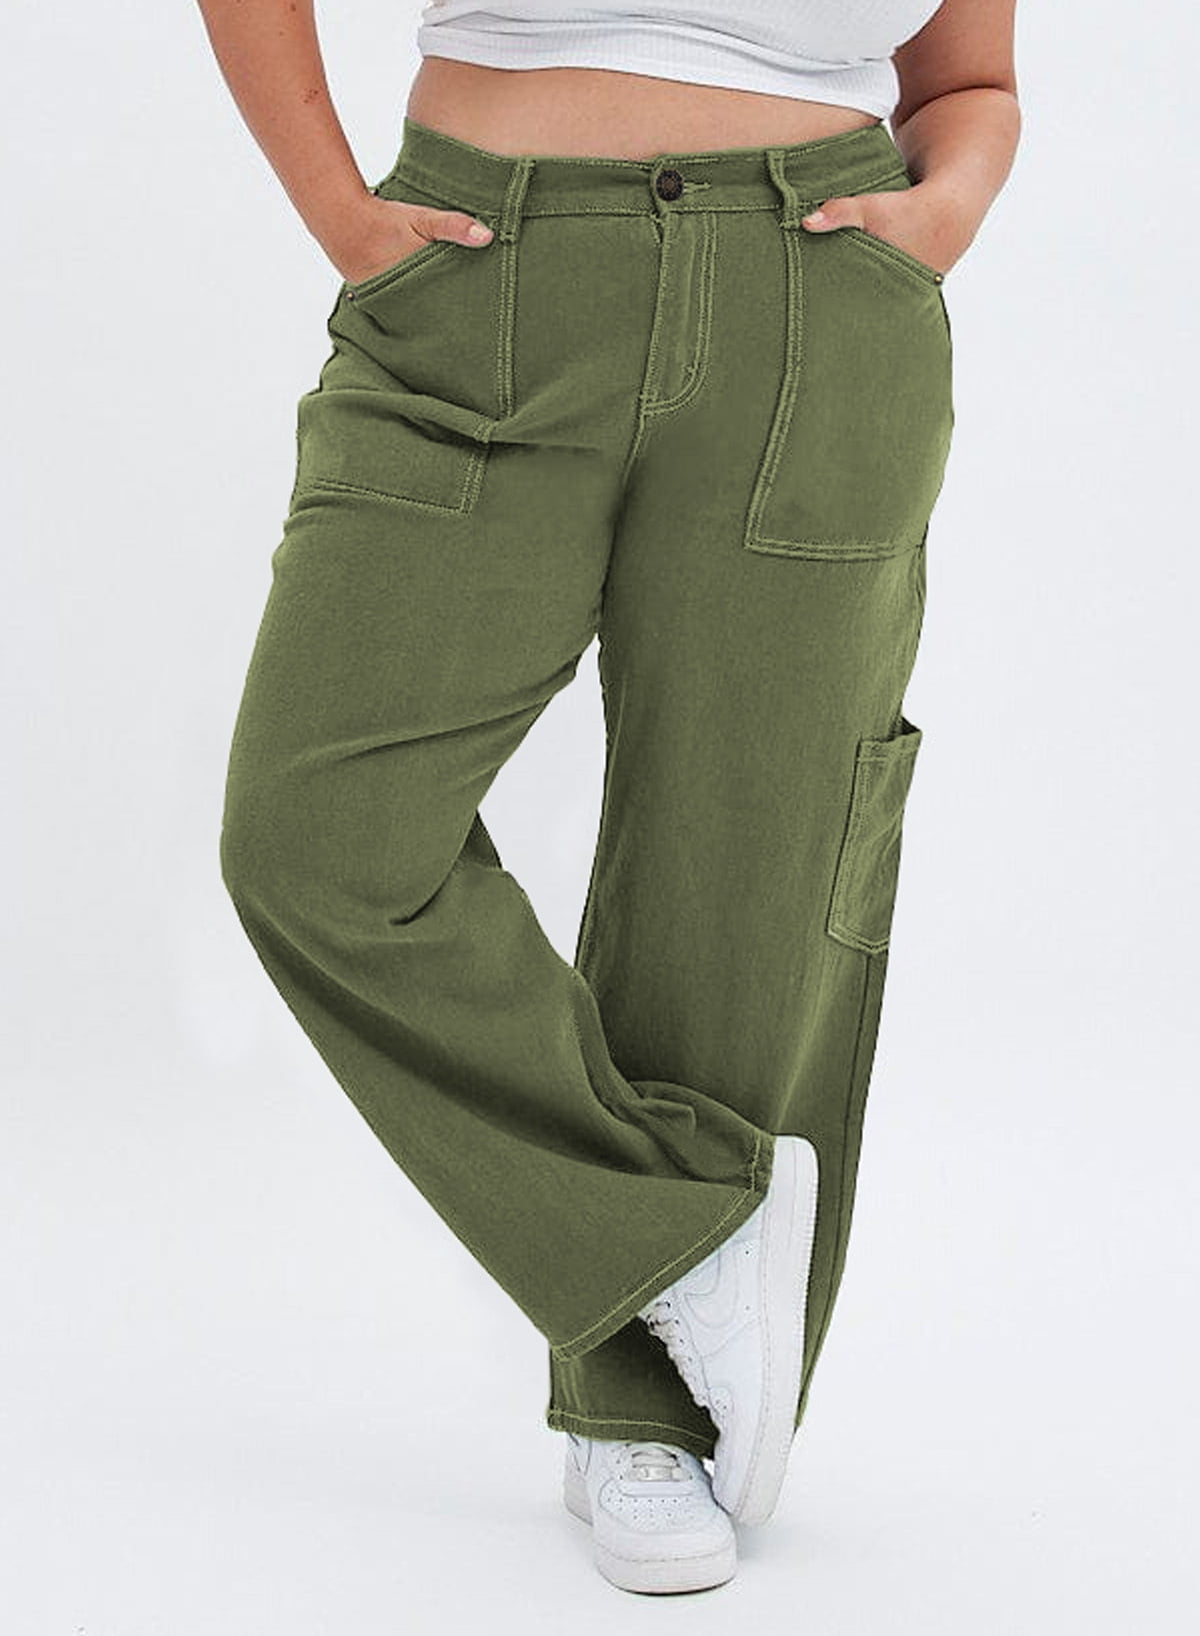 Trending Wholesale baggy pants for women plus size At Affordable Prices –